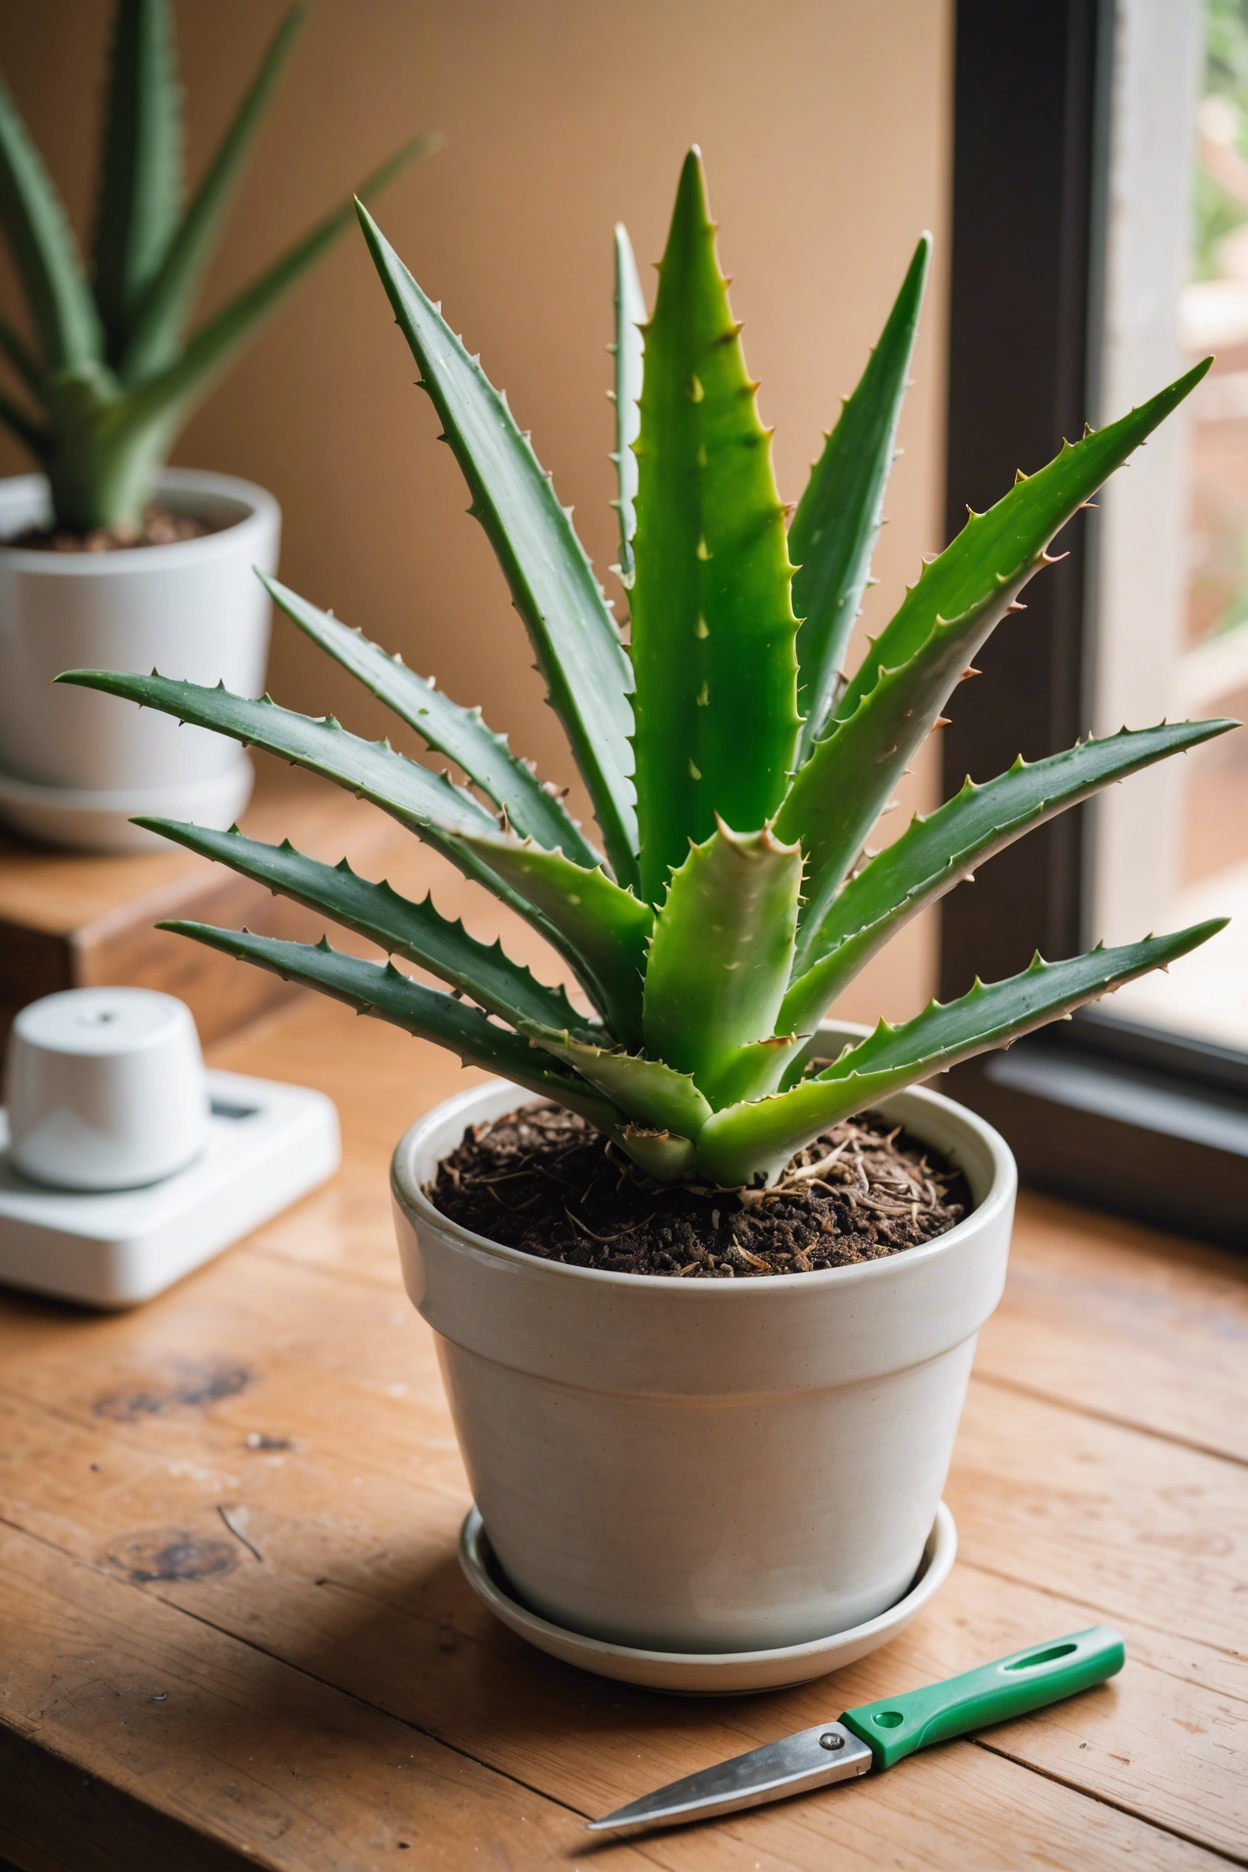 "Browning aloe vera plant in a ceramic pot on a wooden table, with healthy green aloes and plant care tools nearby."